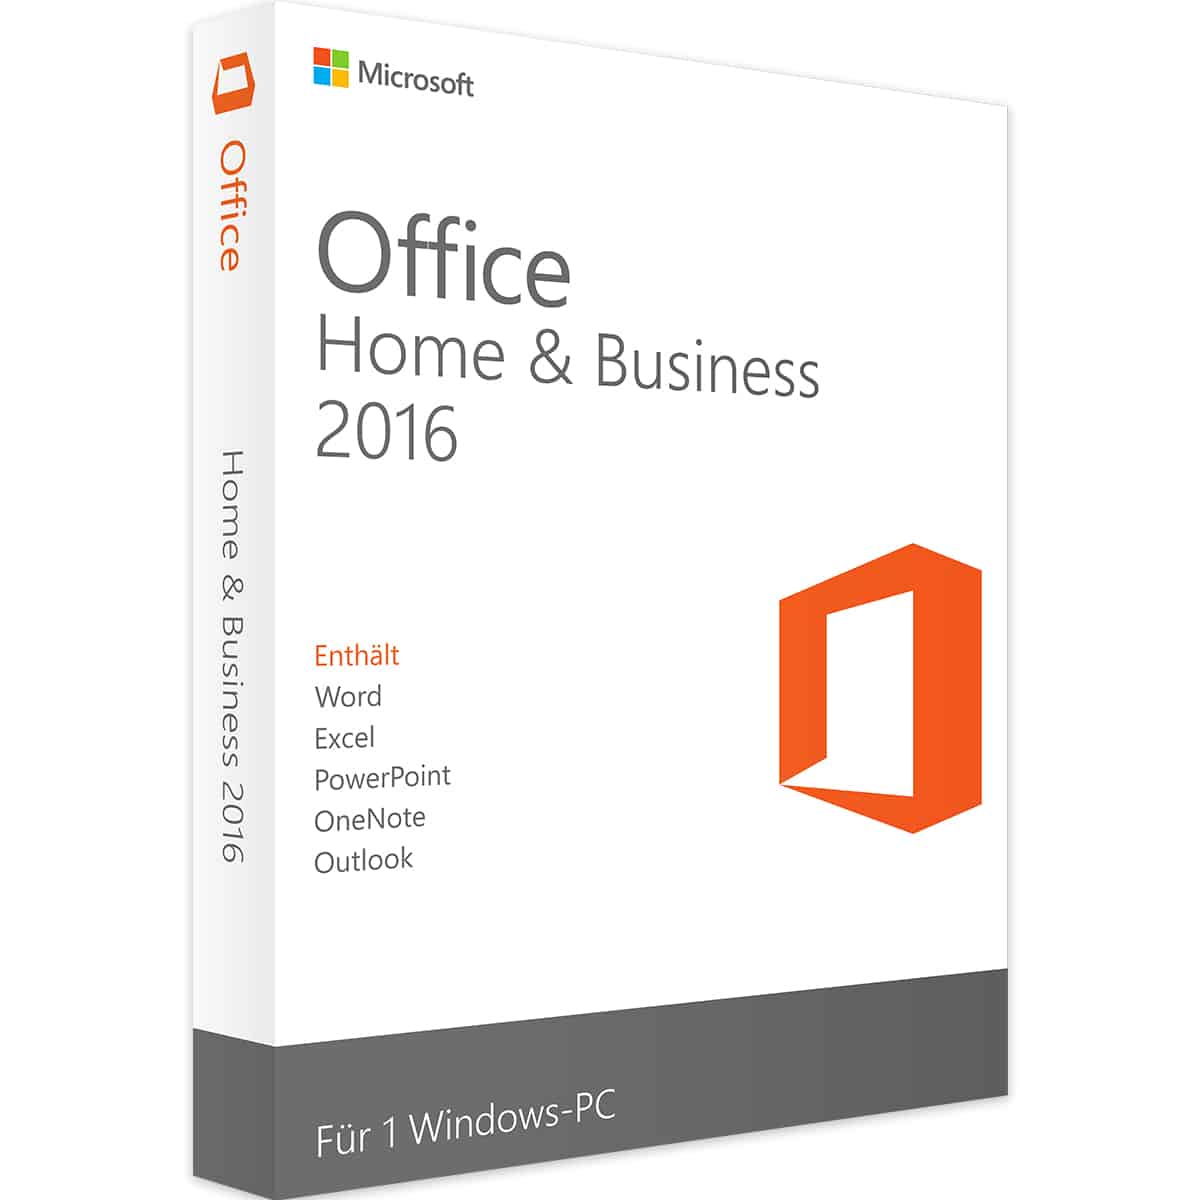 MS Office Home and Business 2016 Product key